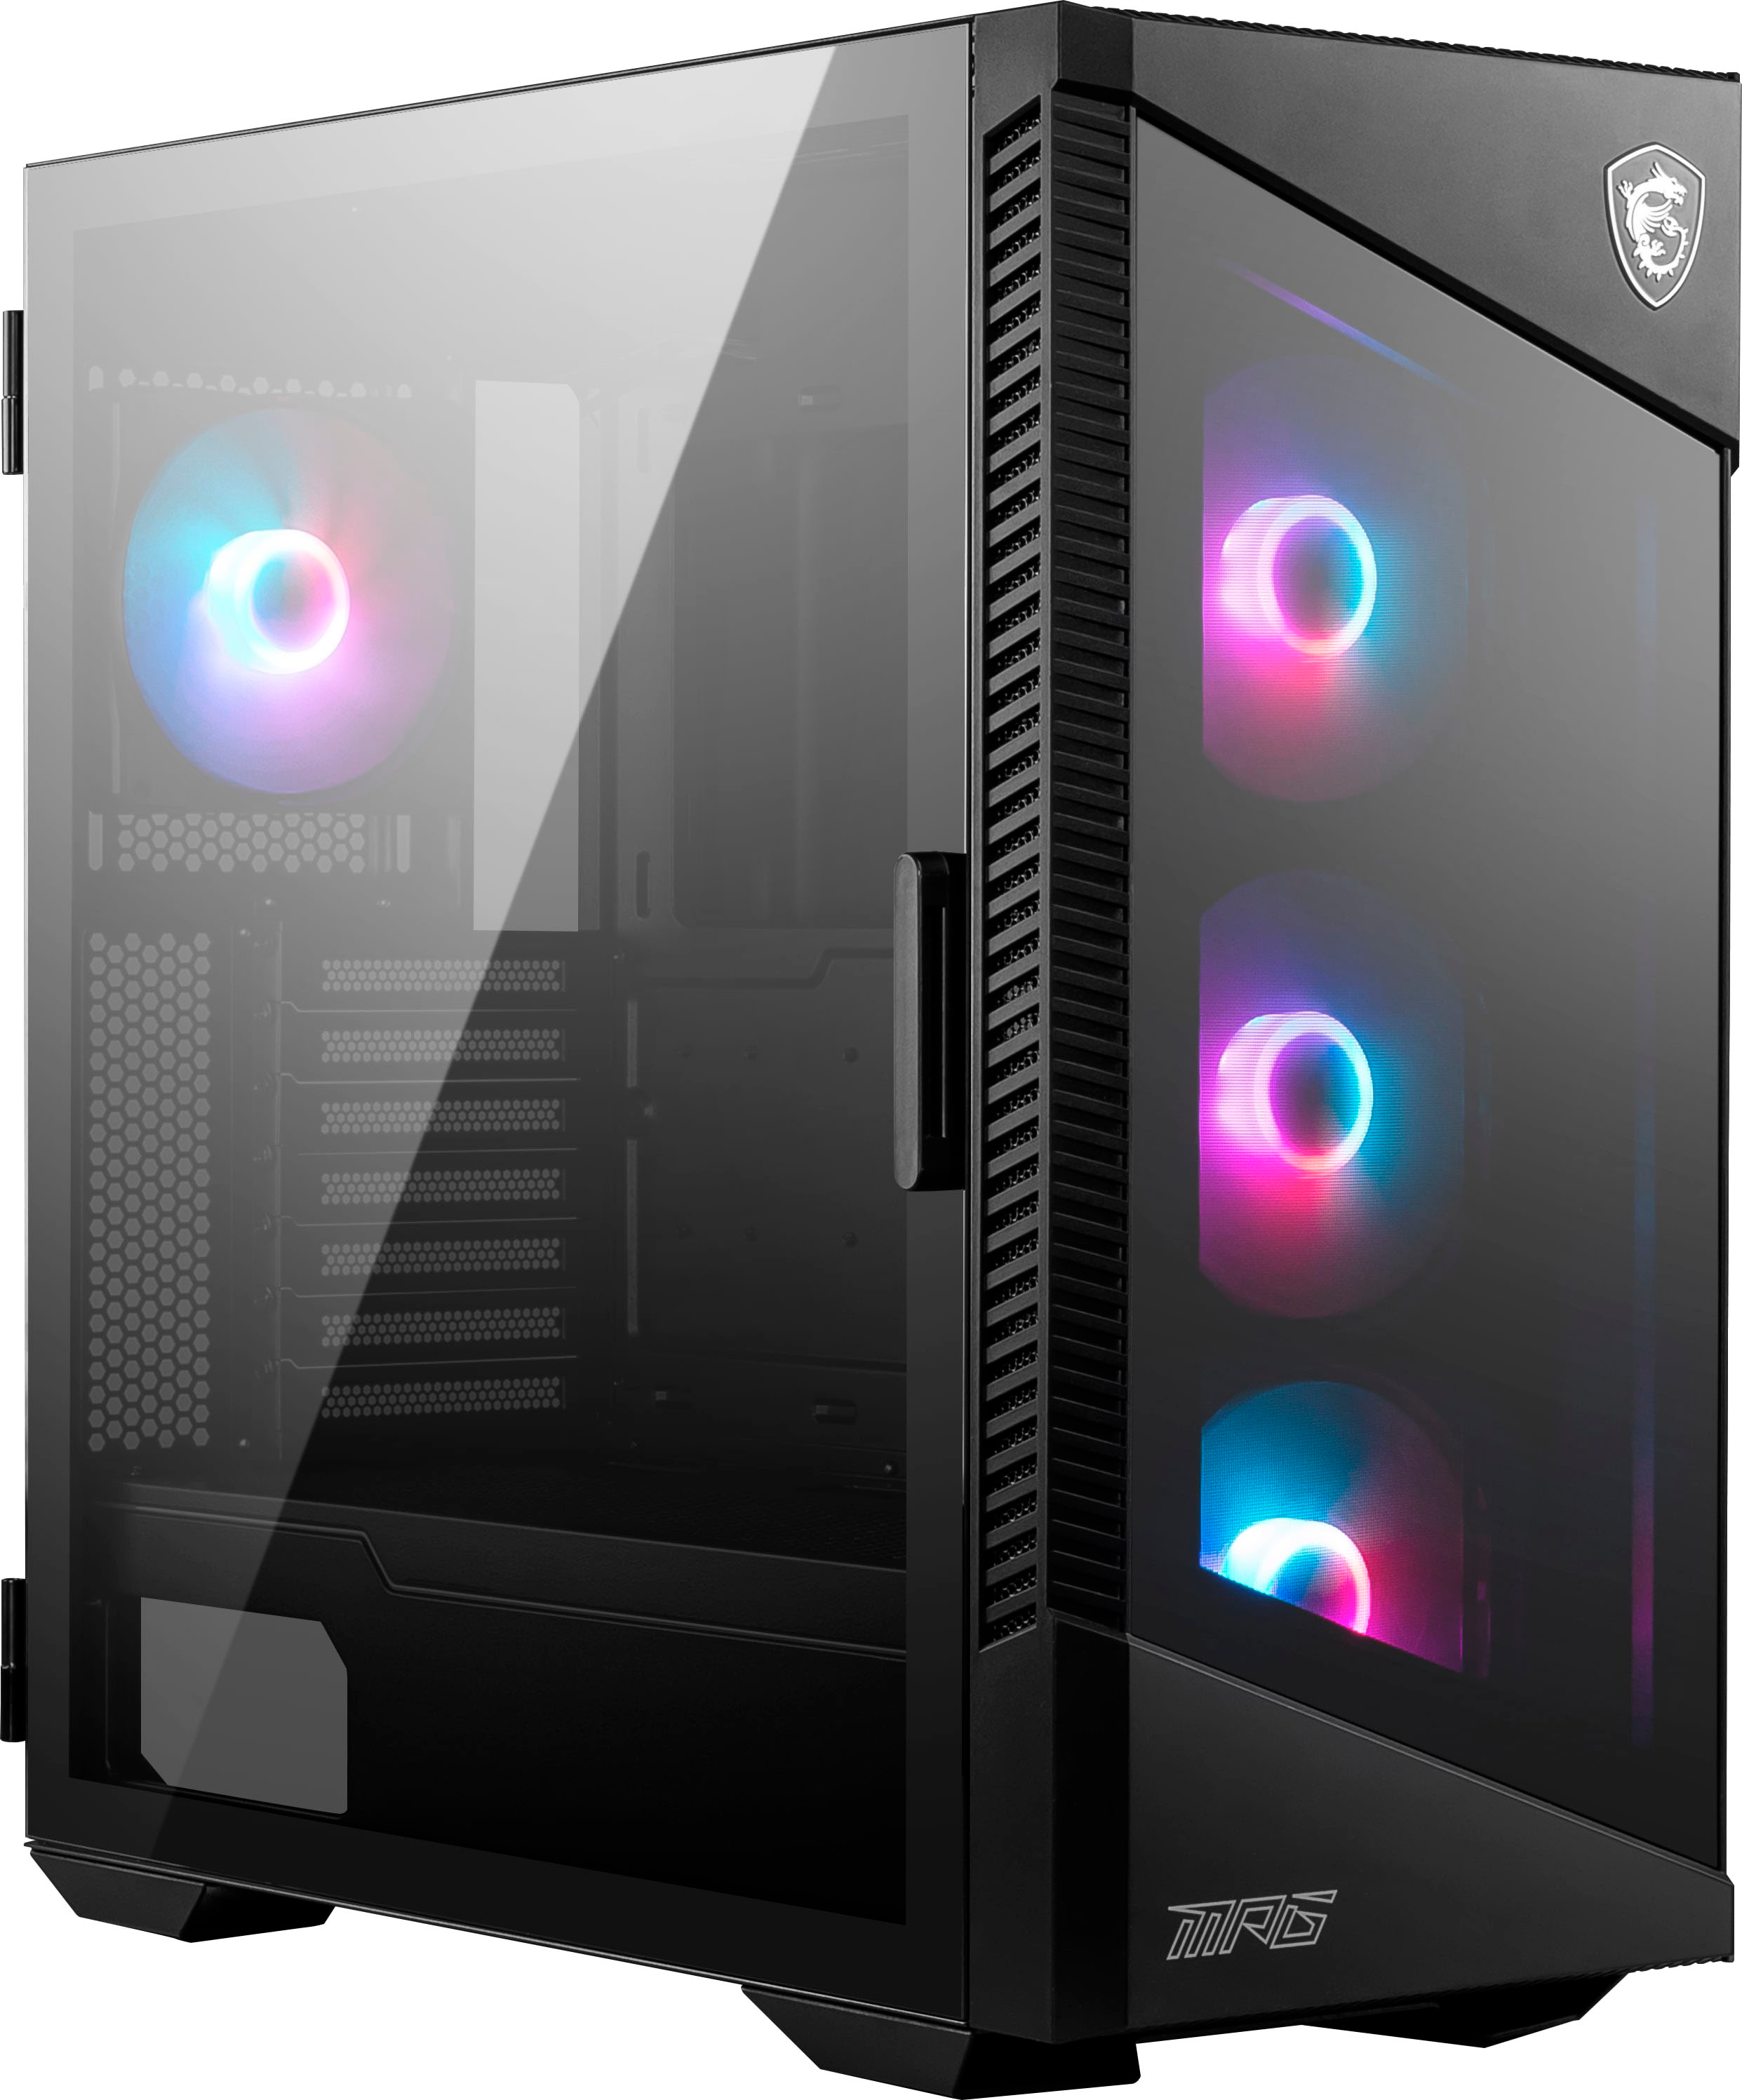  MSI MPG GUNGNIR 110R - Premium Mid-Tower Gaming PC Case -  Tempered Glass Side Panel - 4 x ARGB 120mm Fans - Liquid Cooling Support up  to 360mm Radiator - Two-Tone